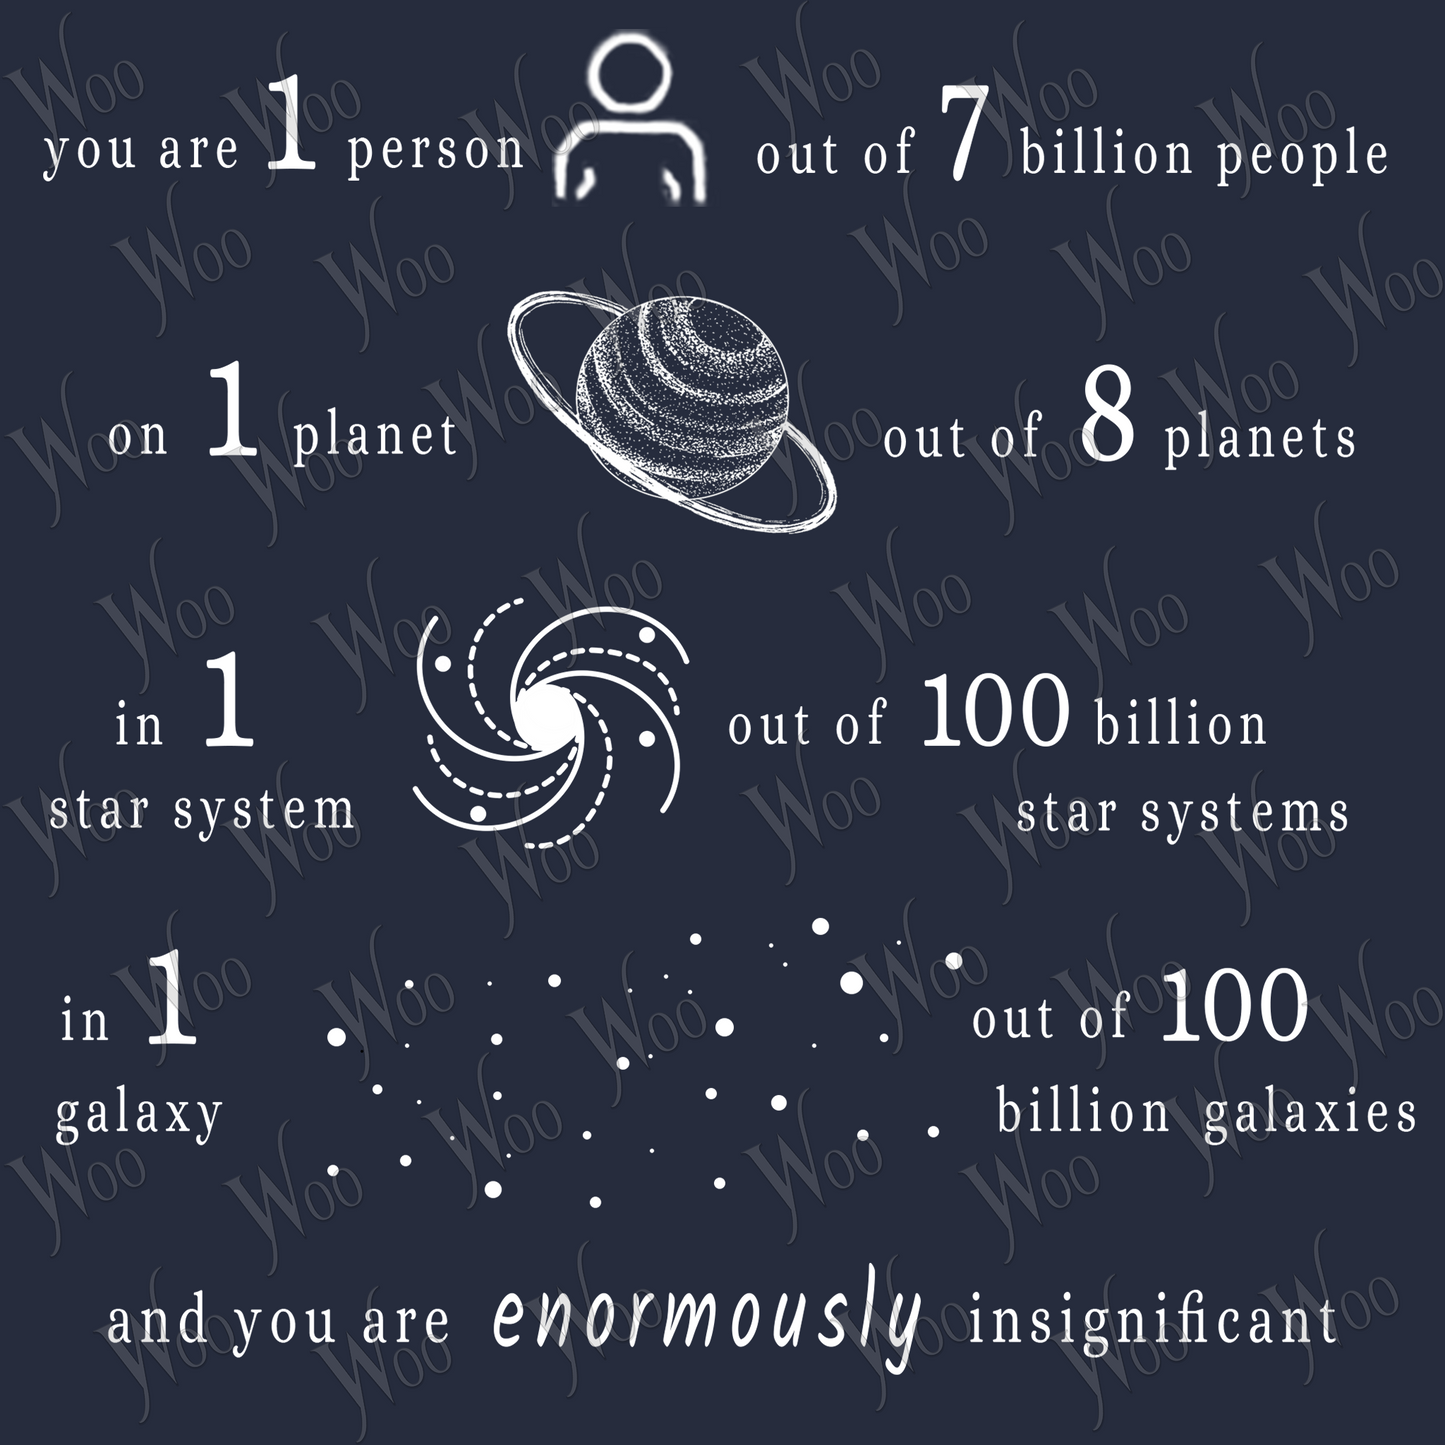 “You are 1 person out of 7 billion people  On 1 planet out of 8 planets  In 1 star system out of 100 billion star systems  In 1 galaxy out of 100 billion galaxies  and you are enormously insignificant”